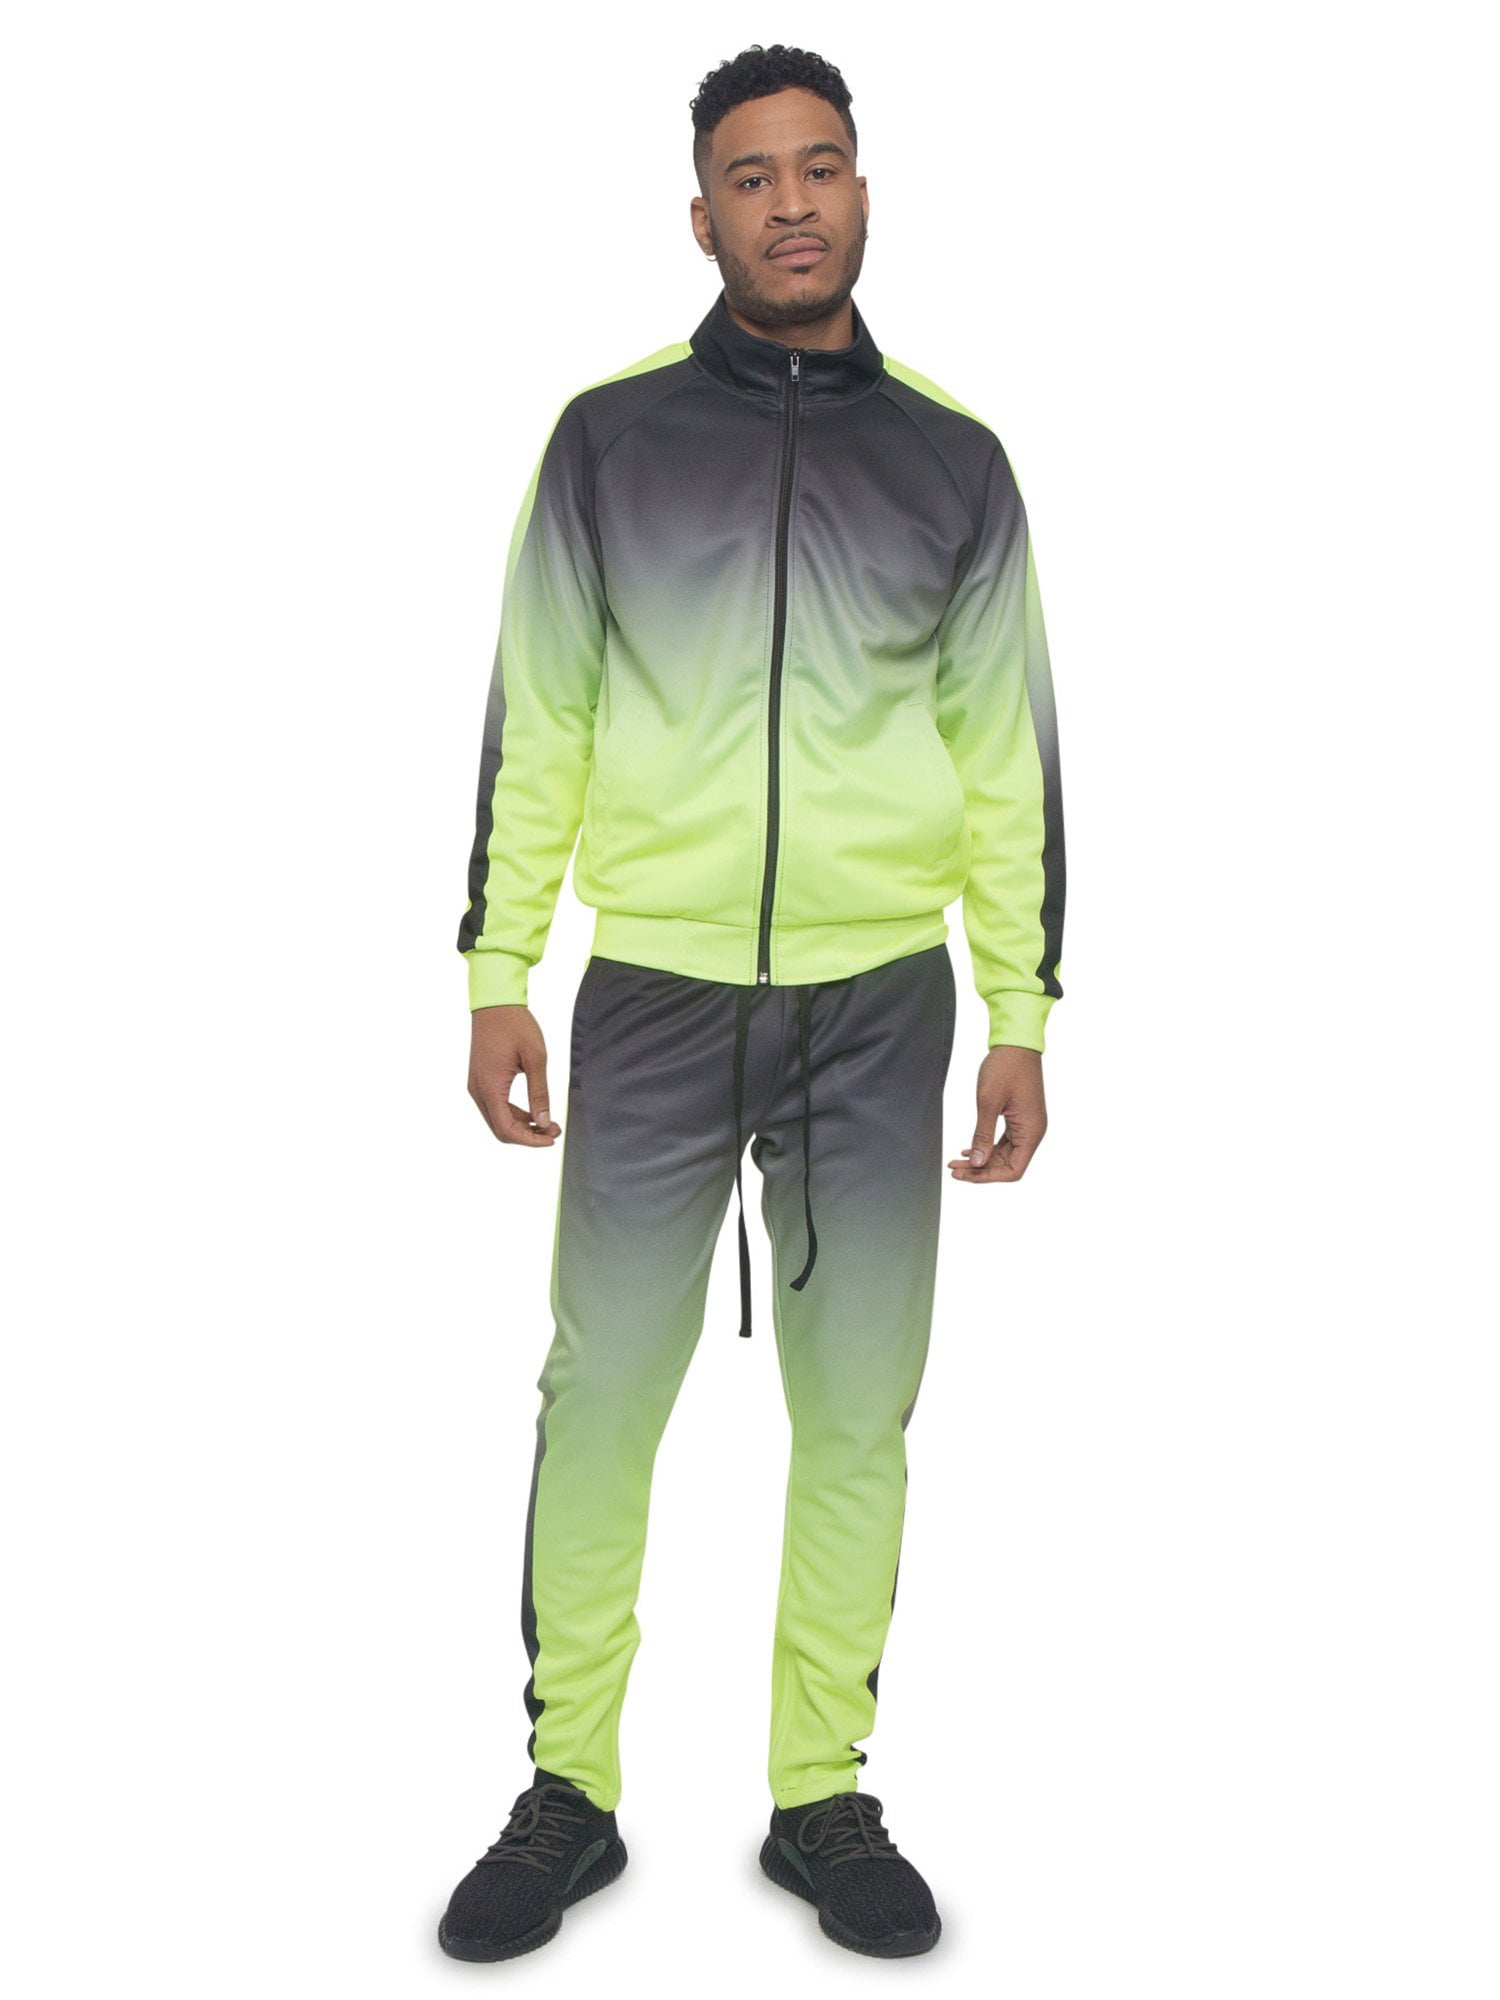 Men's Tracksuit Jogging Pants Jacket Trackies Neon Camouflage Fitness New